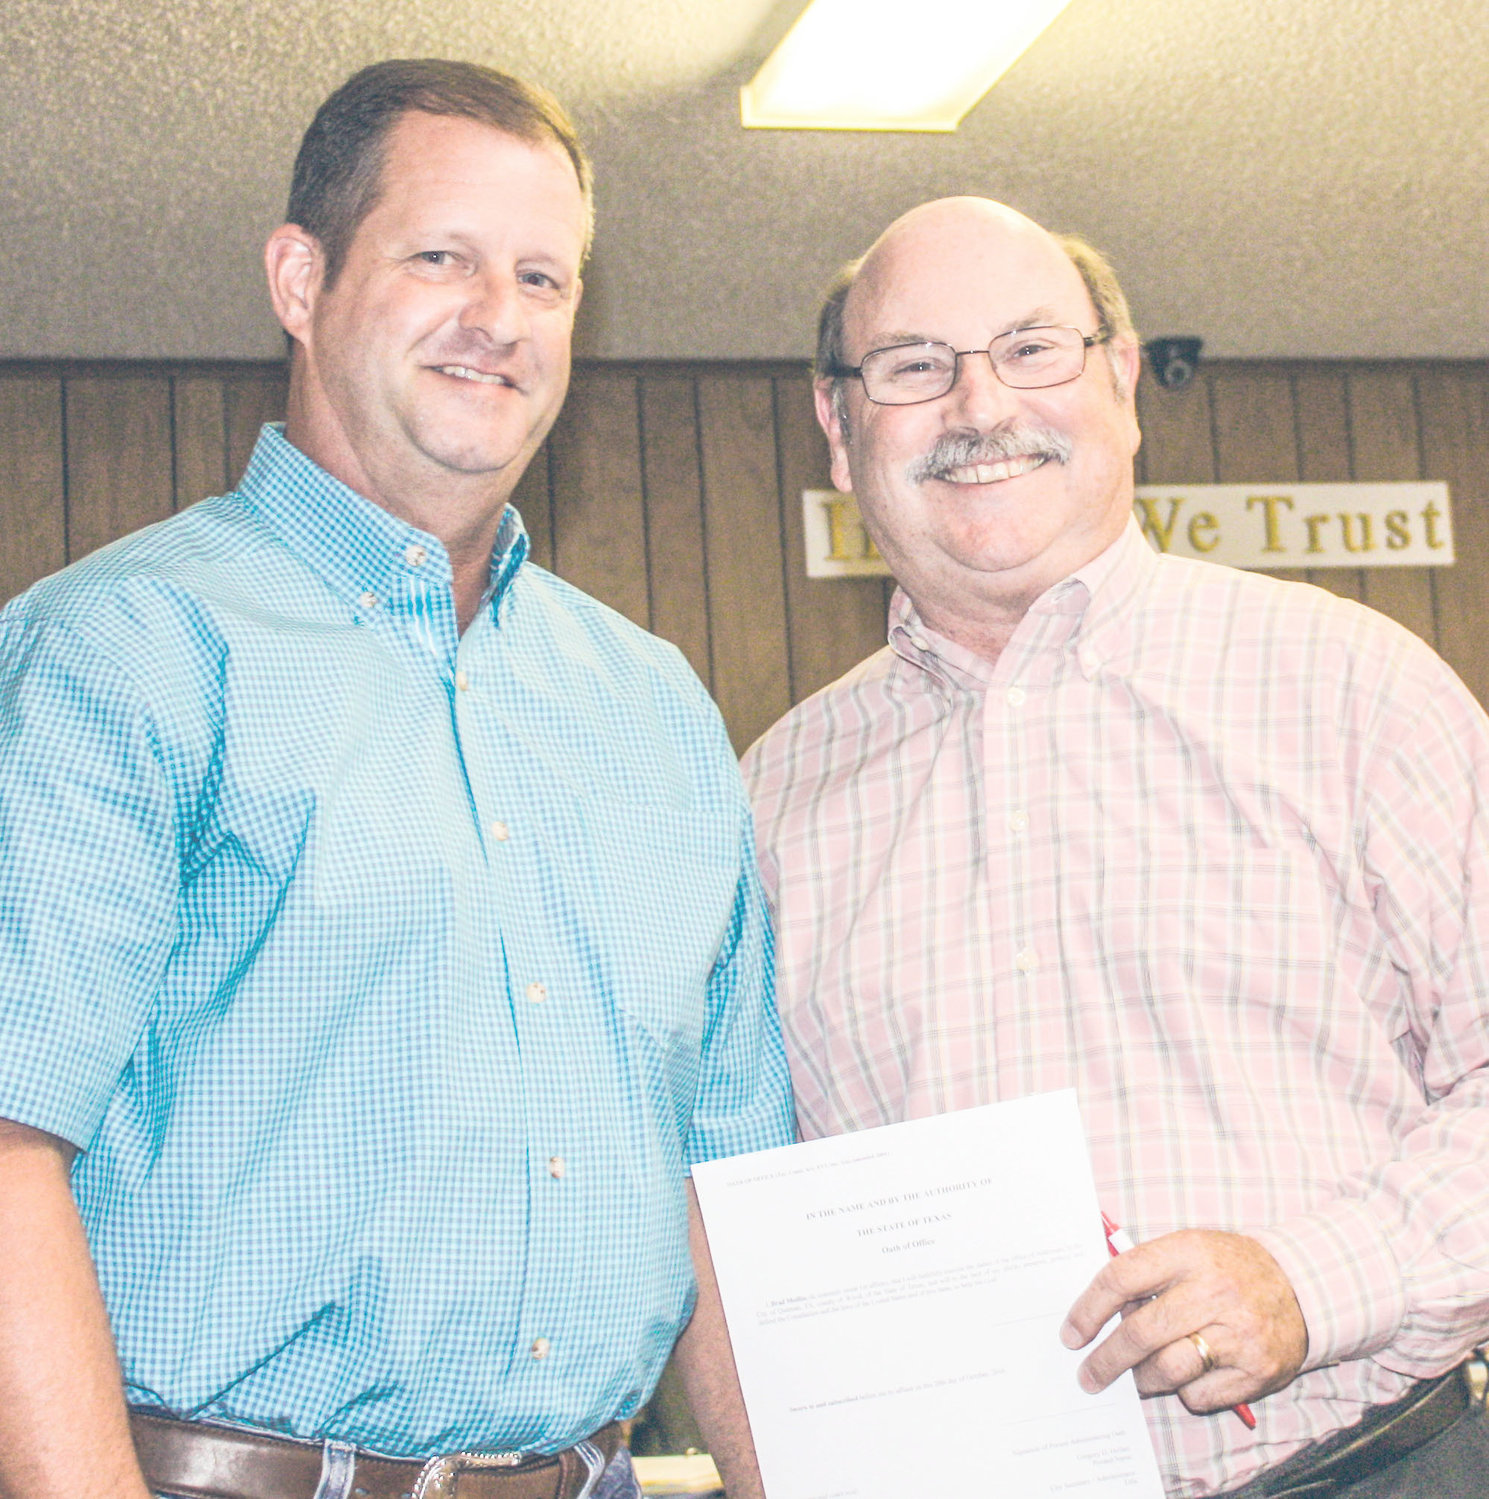 Newly-appointed Quitman City Council Member Brad Medlin displays a big smile just after he had been administered the oath of office Monday evening by Quitman City Secretary-Administrator Greg Hollen, right. (Photo by Tommy Anderson)